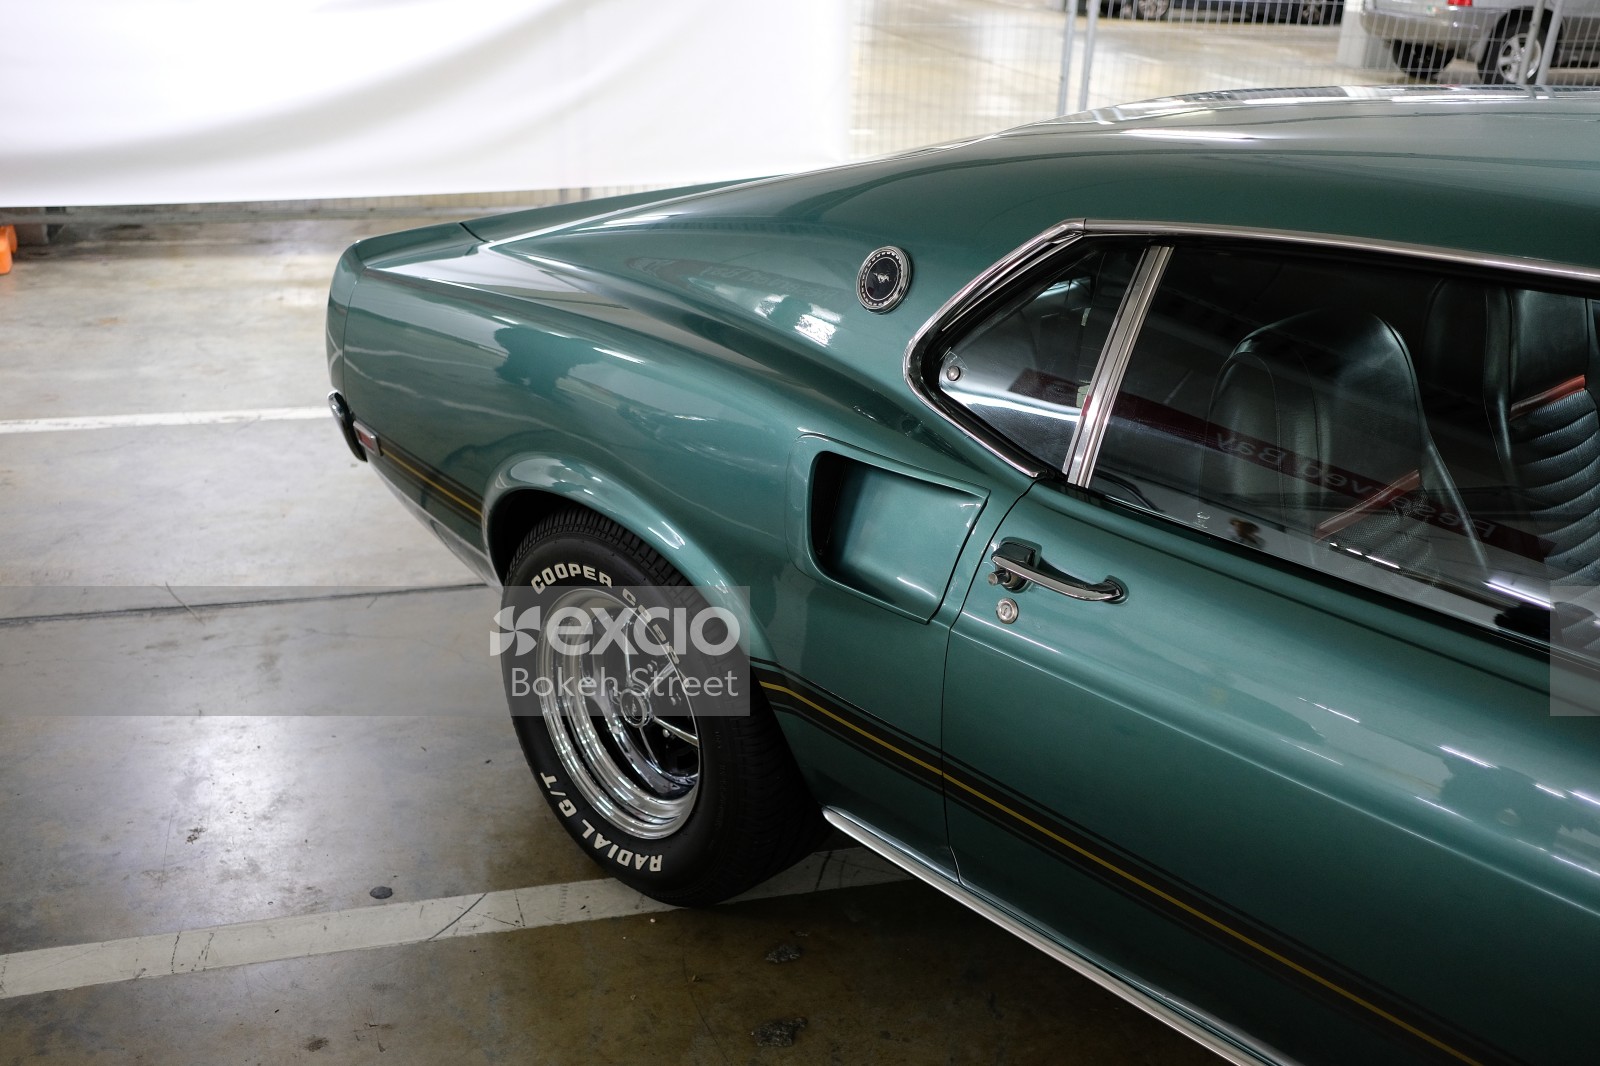 Classic teal Ford Mustang Mach 1 rear fender and wheel